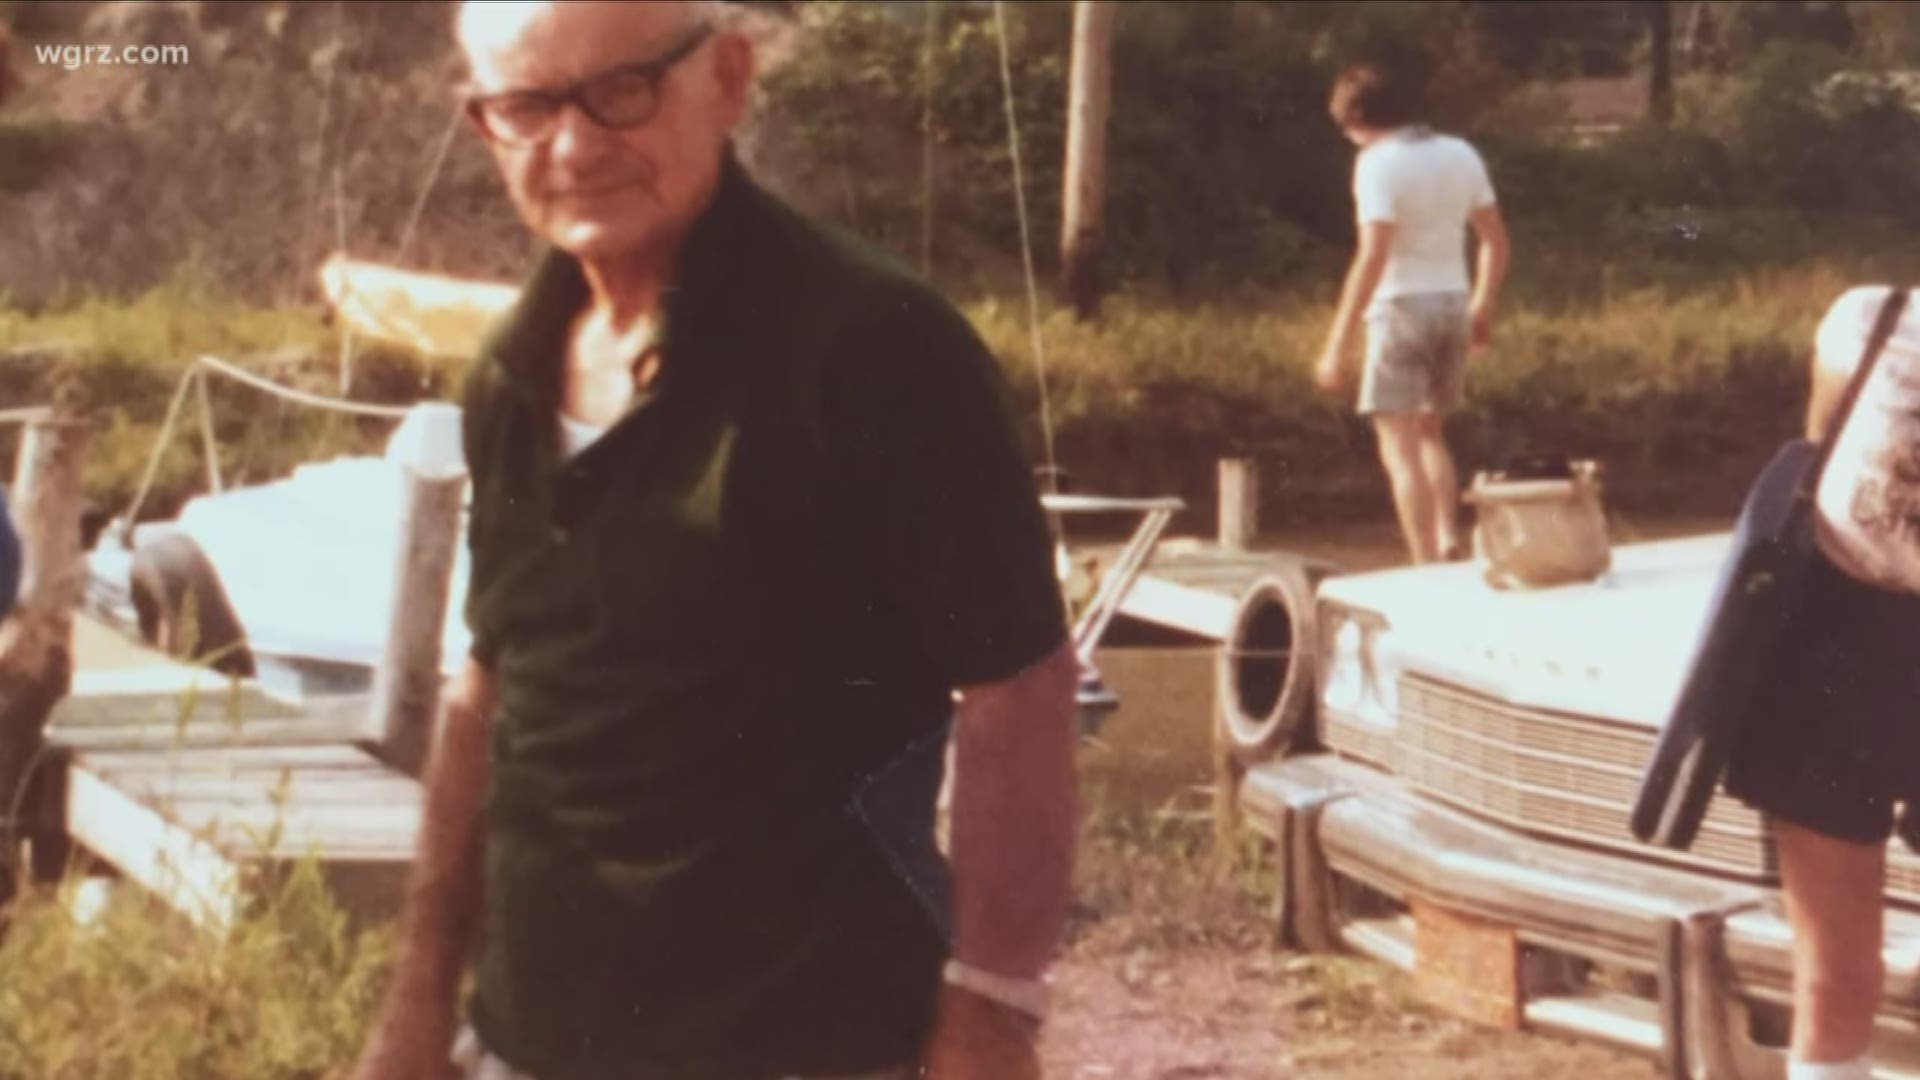 Unsolved: In 1997 an 83-year-old man was beat to death in his backyard.